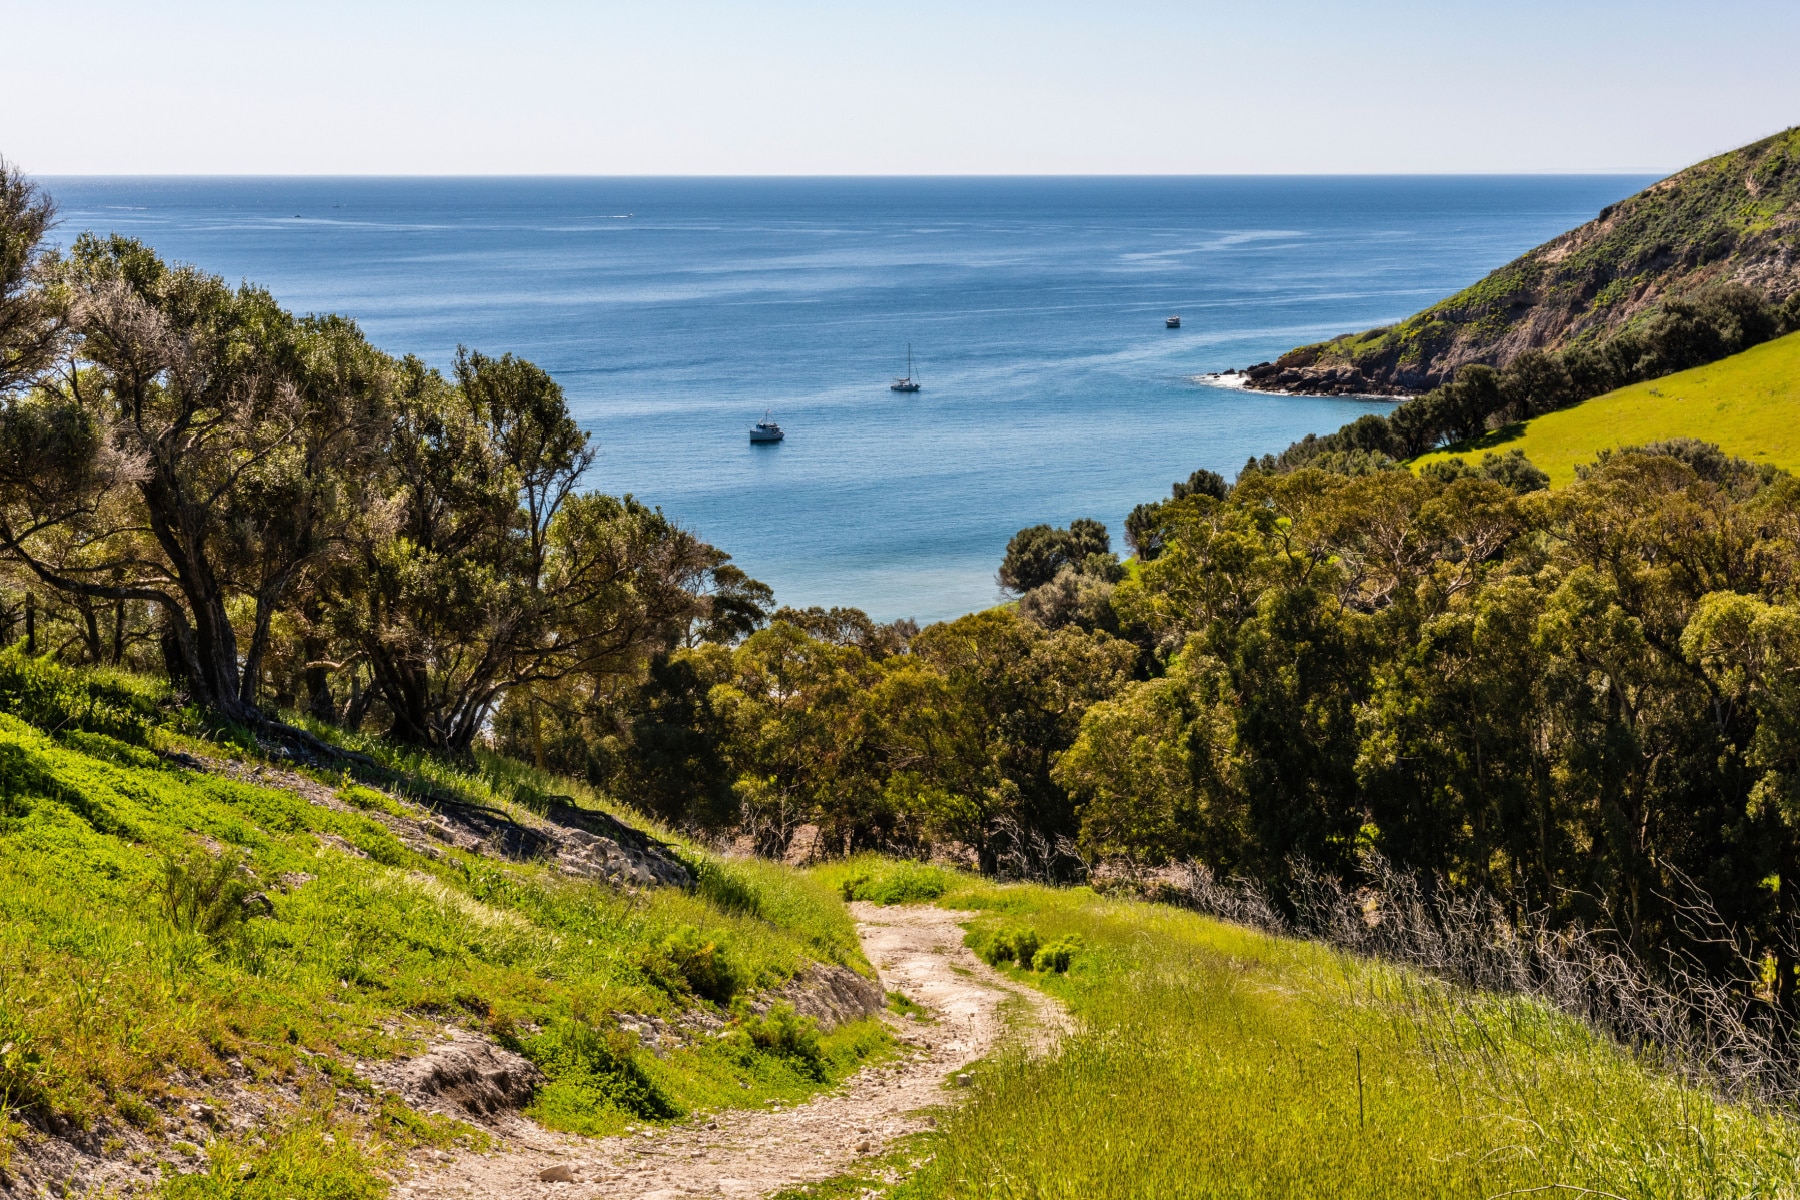 A trail winds down to Smugglers Cove on Santa Cruz Island at Channel Islands National Park.